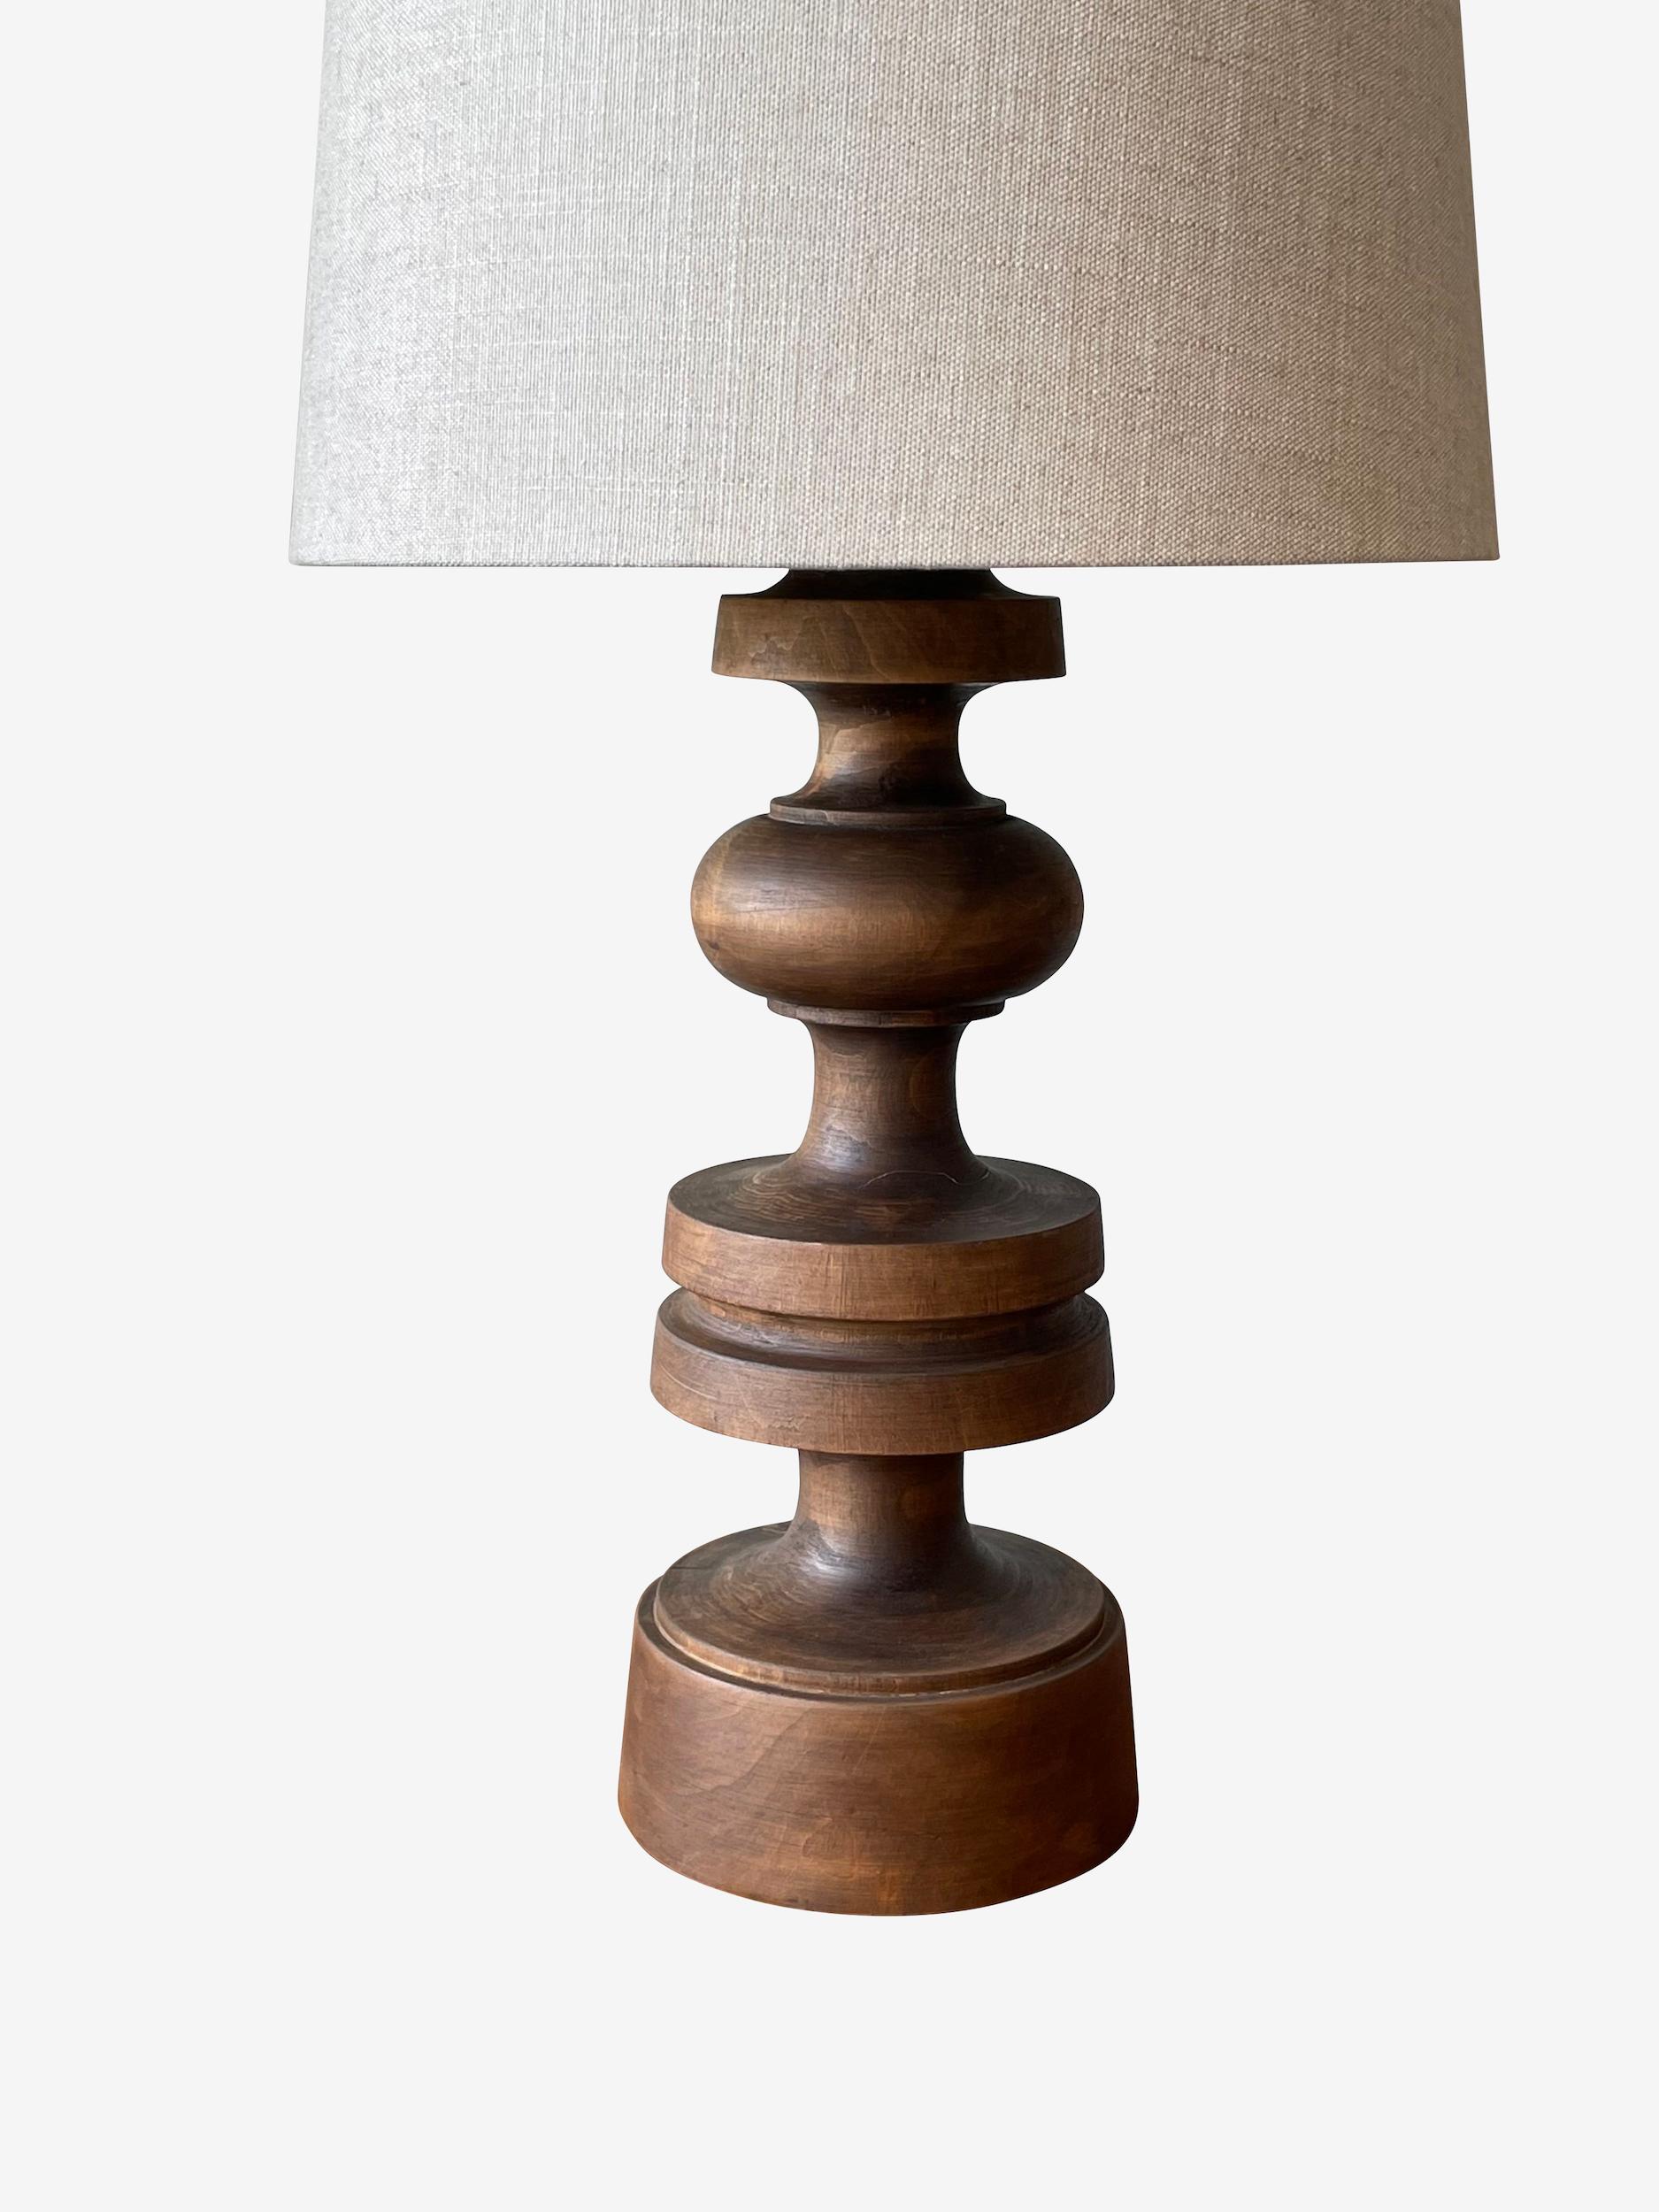 1960's Spanish pair turned finial shaped oak wood lamps.
Linen shades included.
Base measures 7